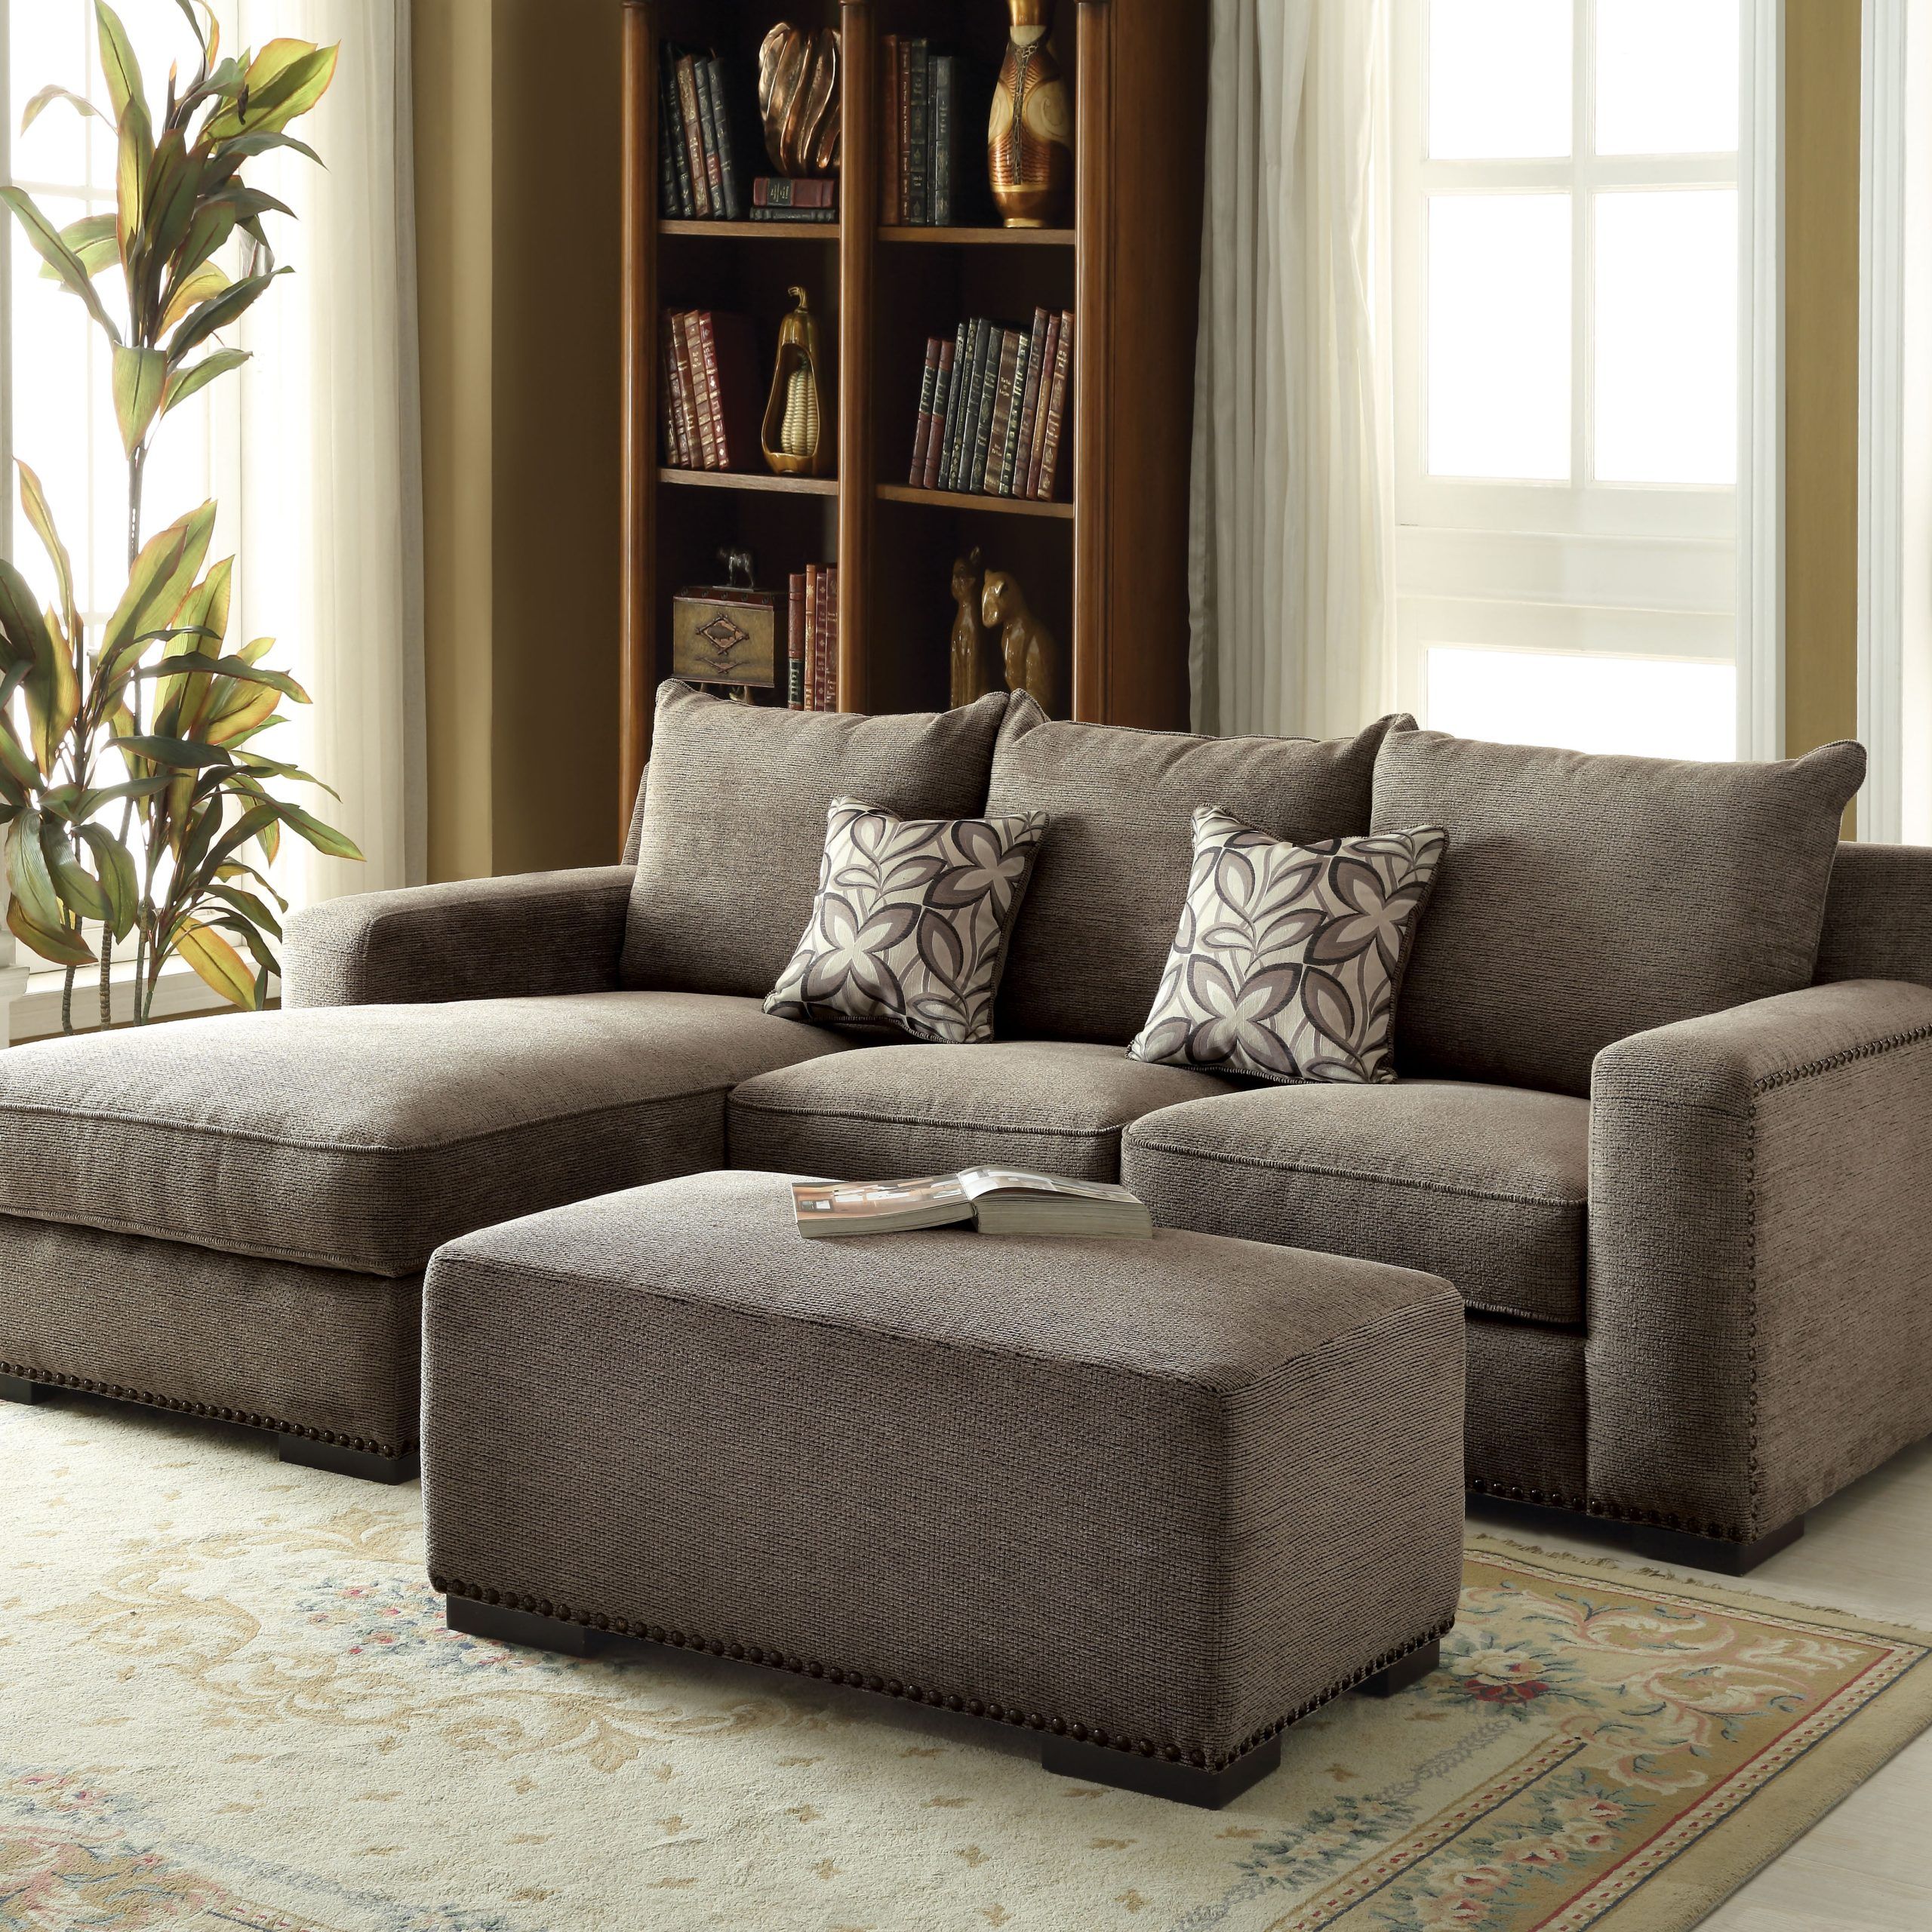 Acme Ushury Sectional Sofa With 2 Pillows , Gray Chenille – Walmart Within Chenille Sectional Sofas (Gallery 13 of 20)